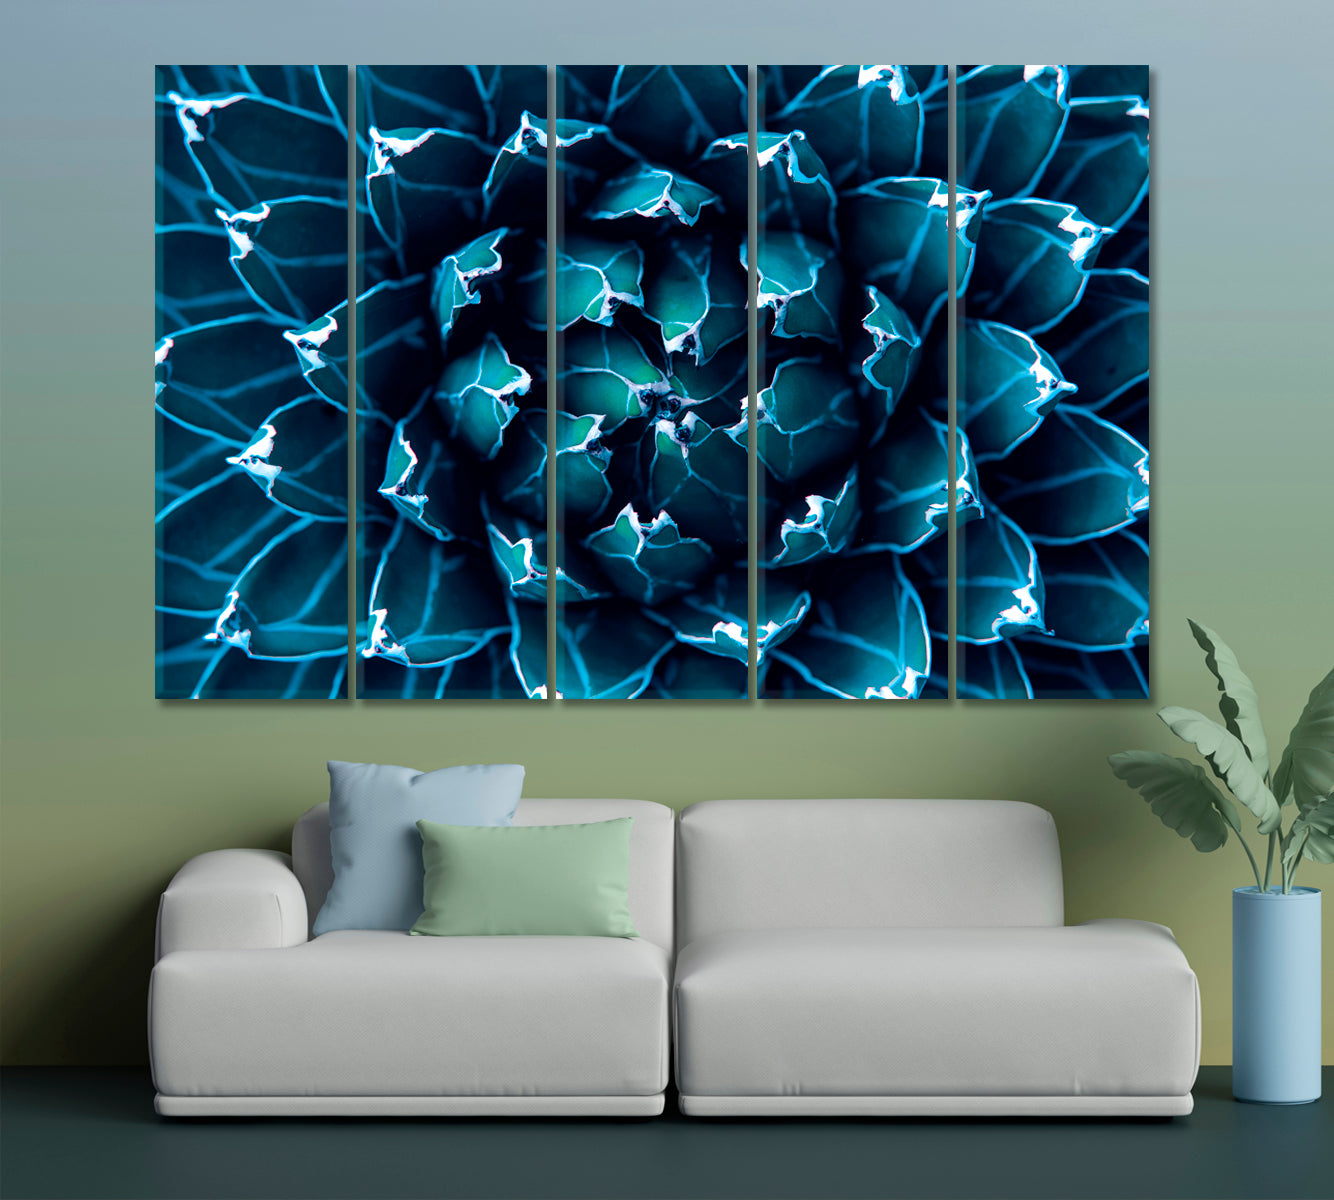 Agave Cactus Abstract Natural Tropical Pattern Floral & Botanical Split Art Artesty 5 panels 36" x 24" 